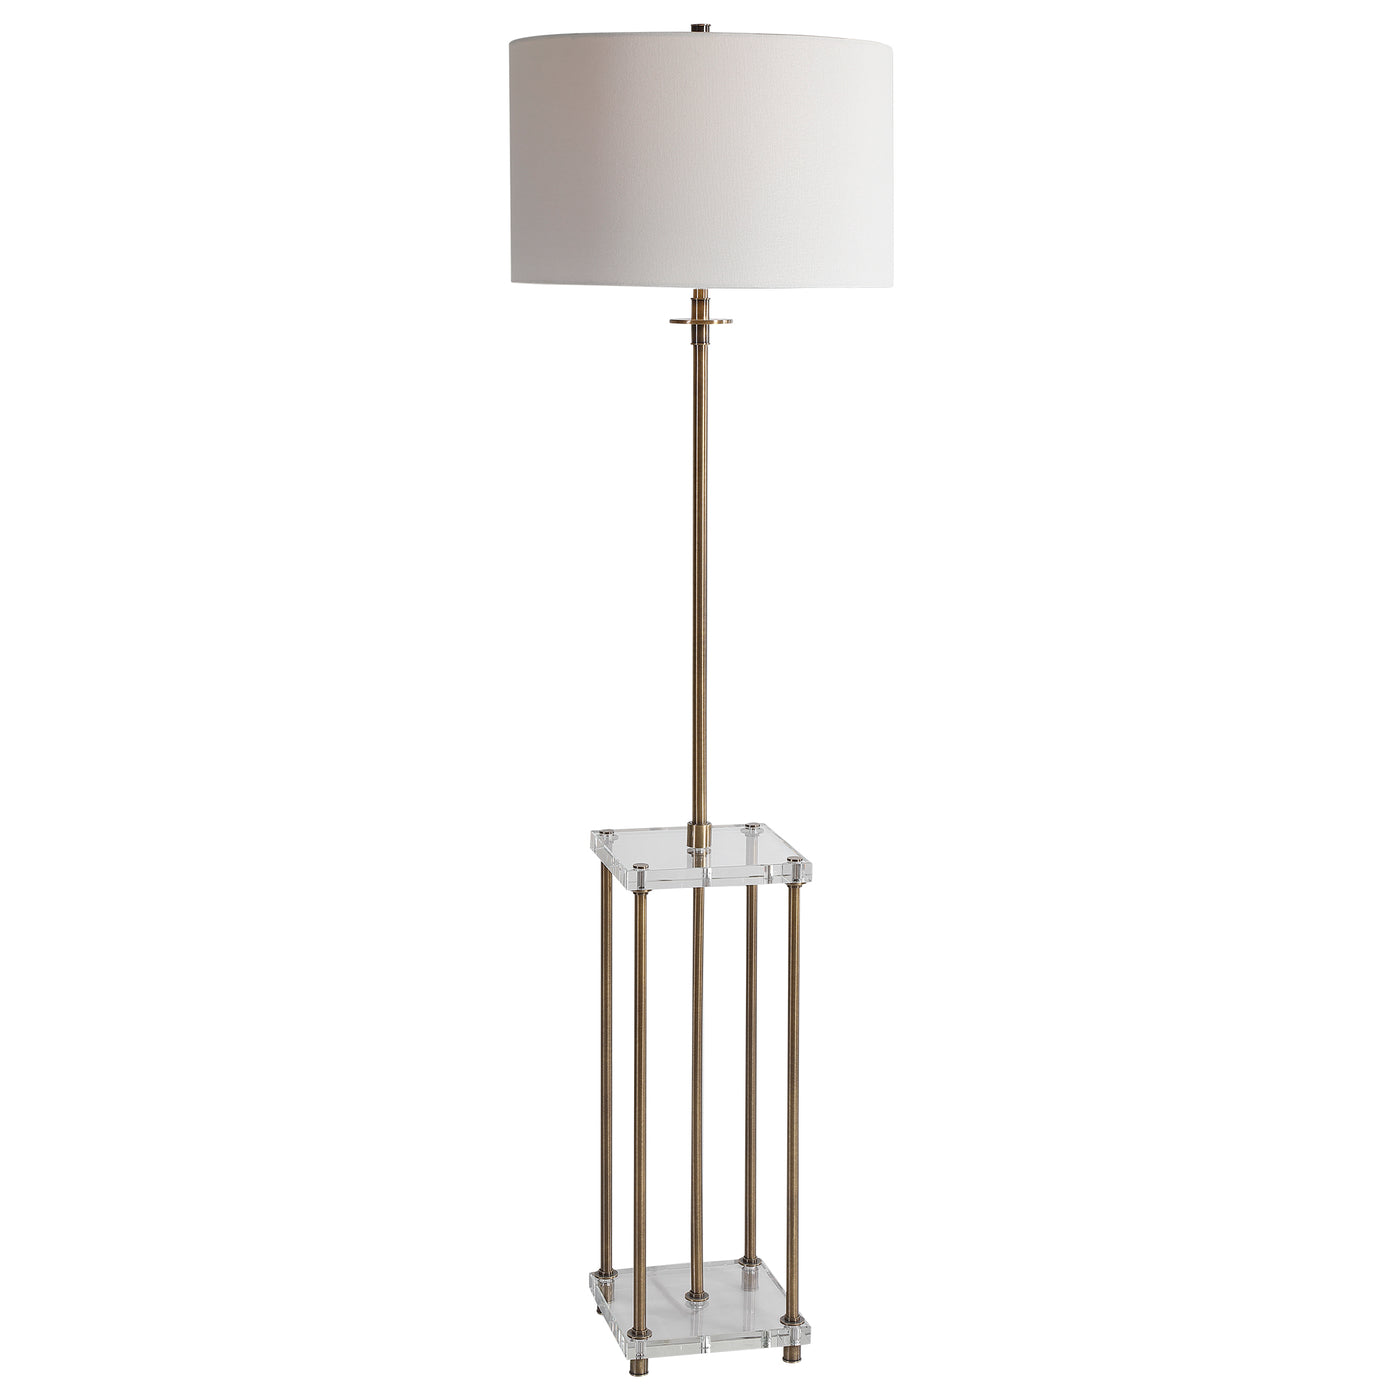 Sophisticated And Elegant, This Floor Lamp Displays A Transitional Look With Sleek Iron Details Finished In A Plated Antiq...